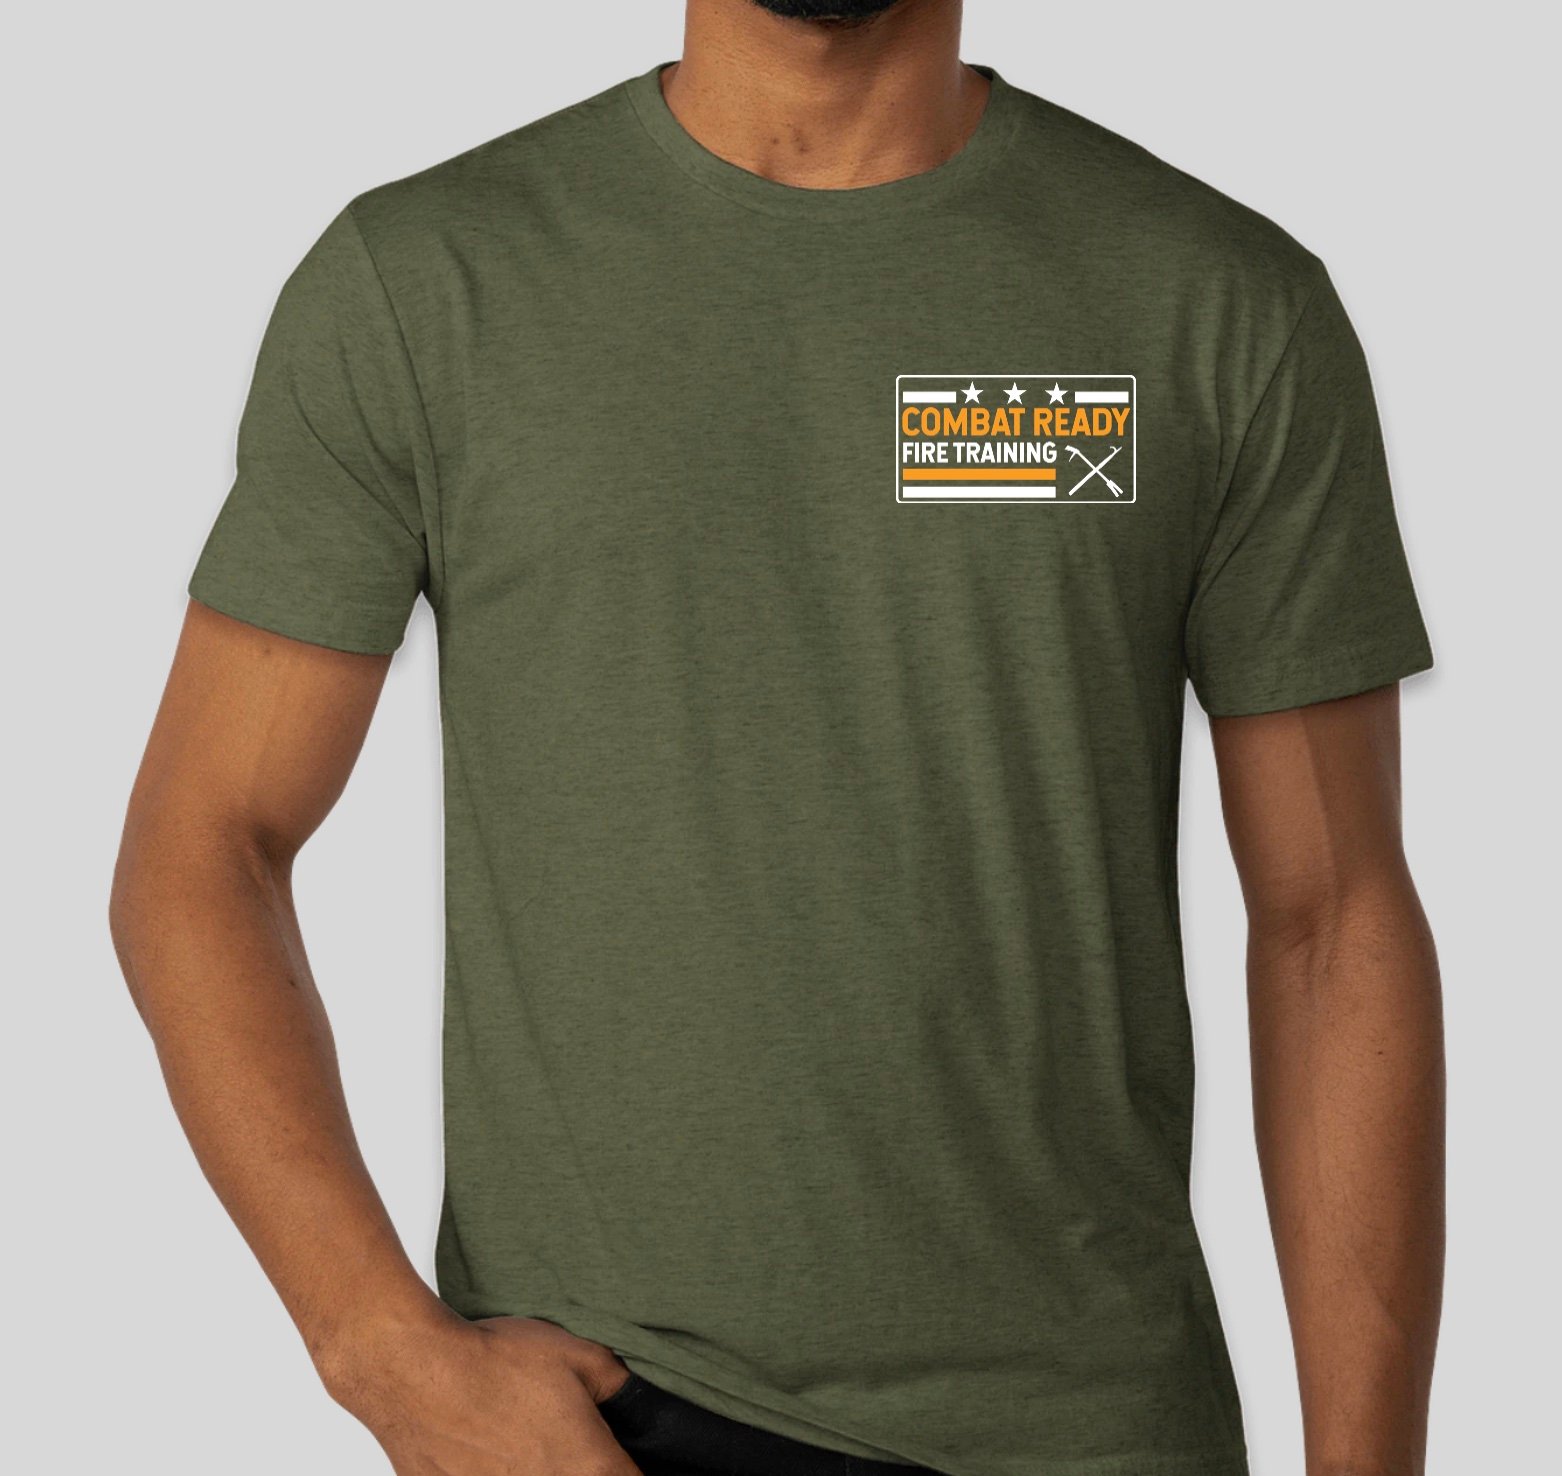 Shortsleeve Green tshirt front with Combat Ready Fire Training flag logo